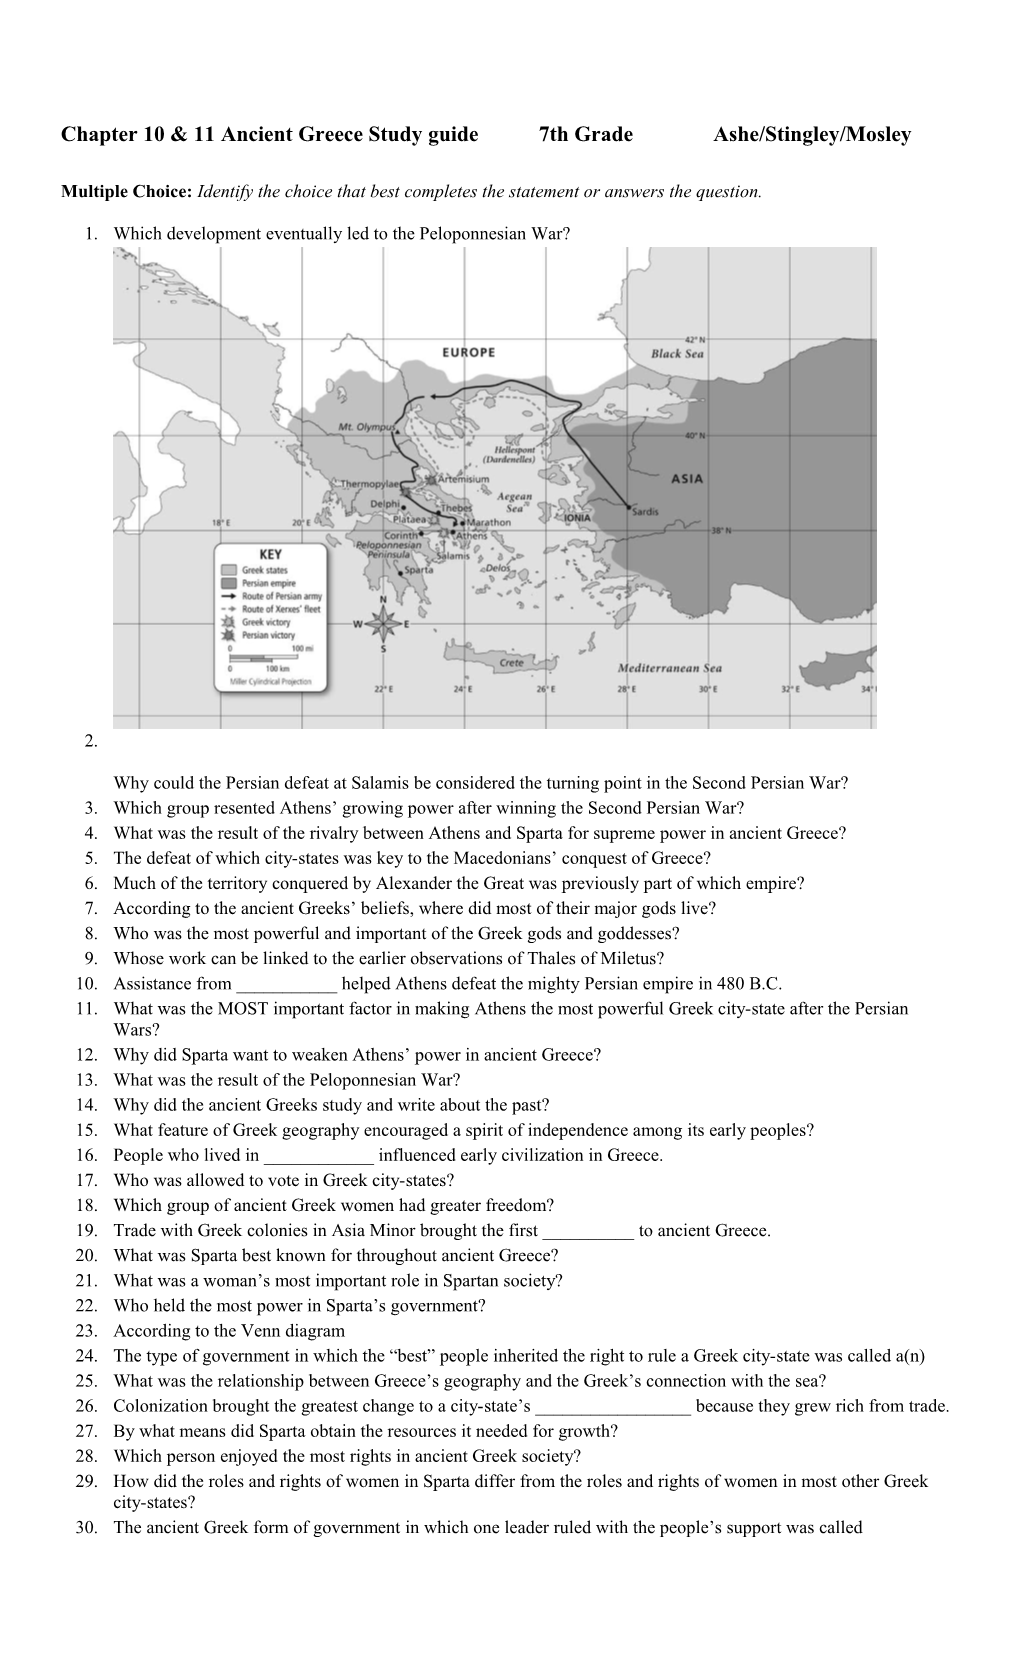 Chapter 10 & 11 Ancient Greece Study Guide 7Th Gradeashe/Stingley/Mosley